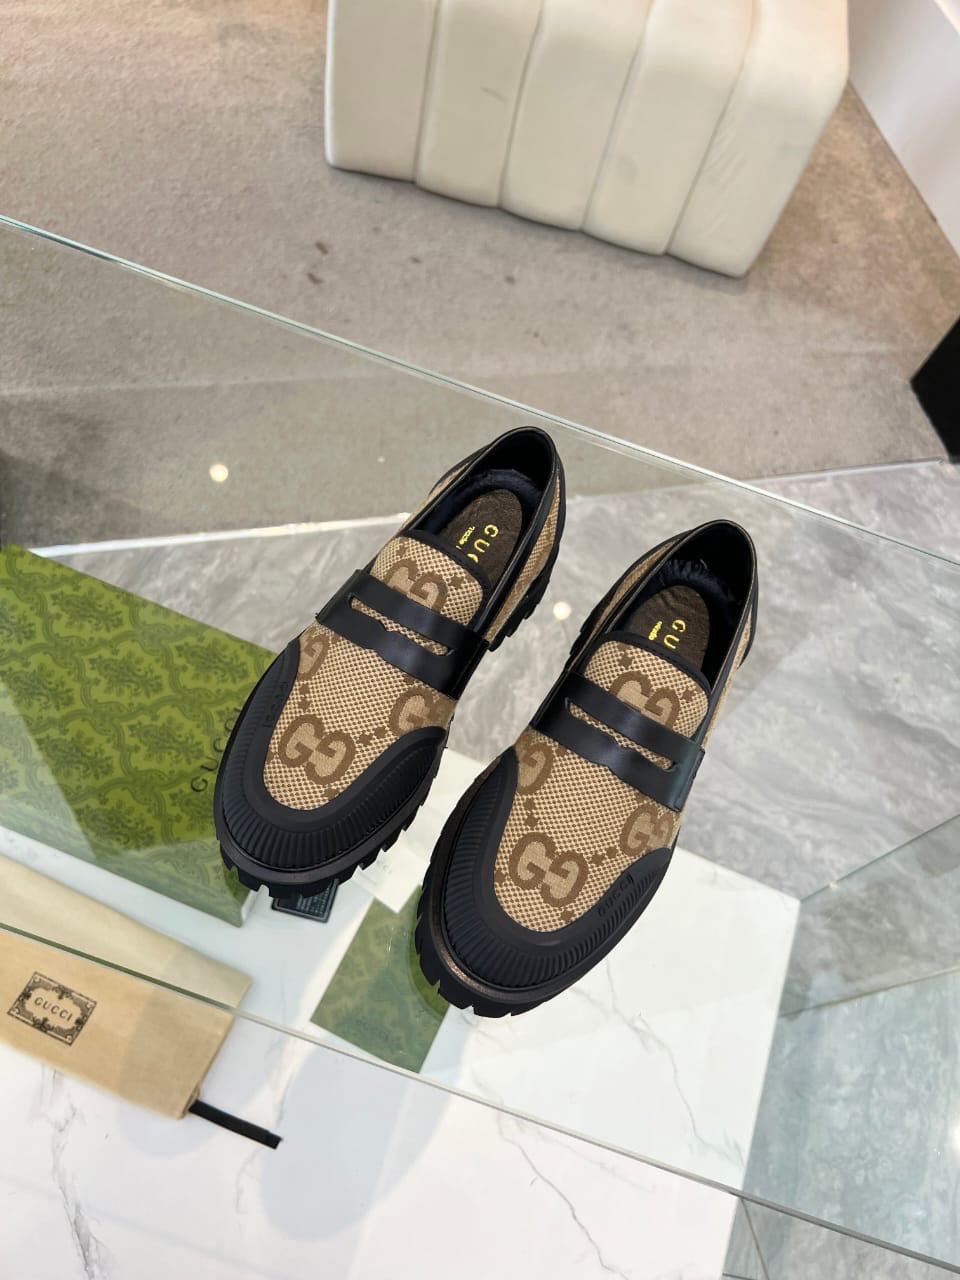 Gucci  Men's loafers Shoes.